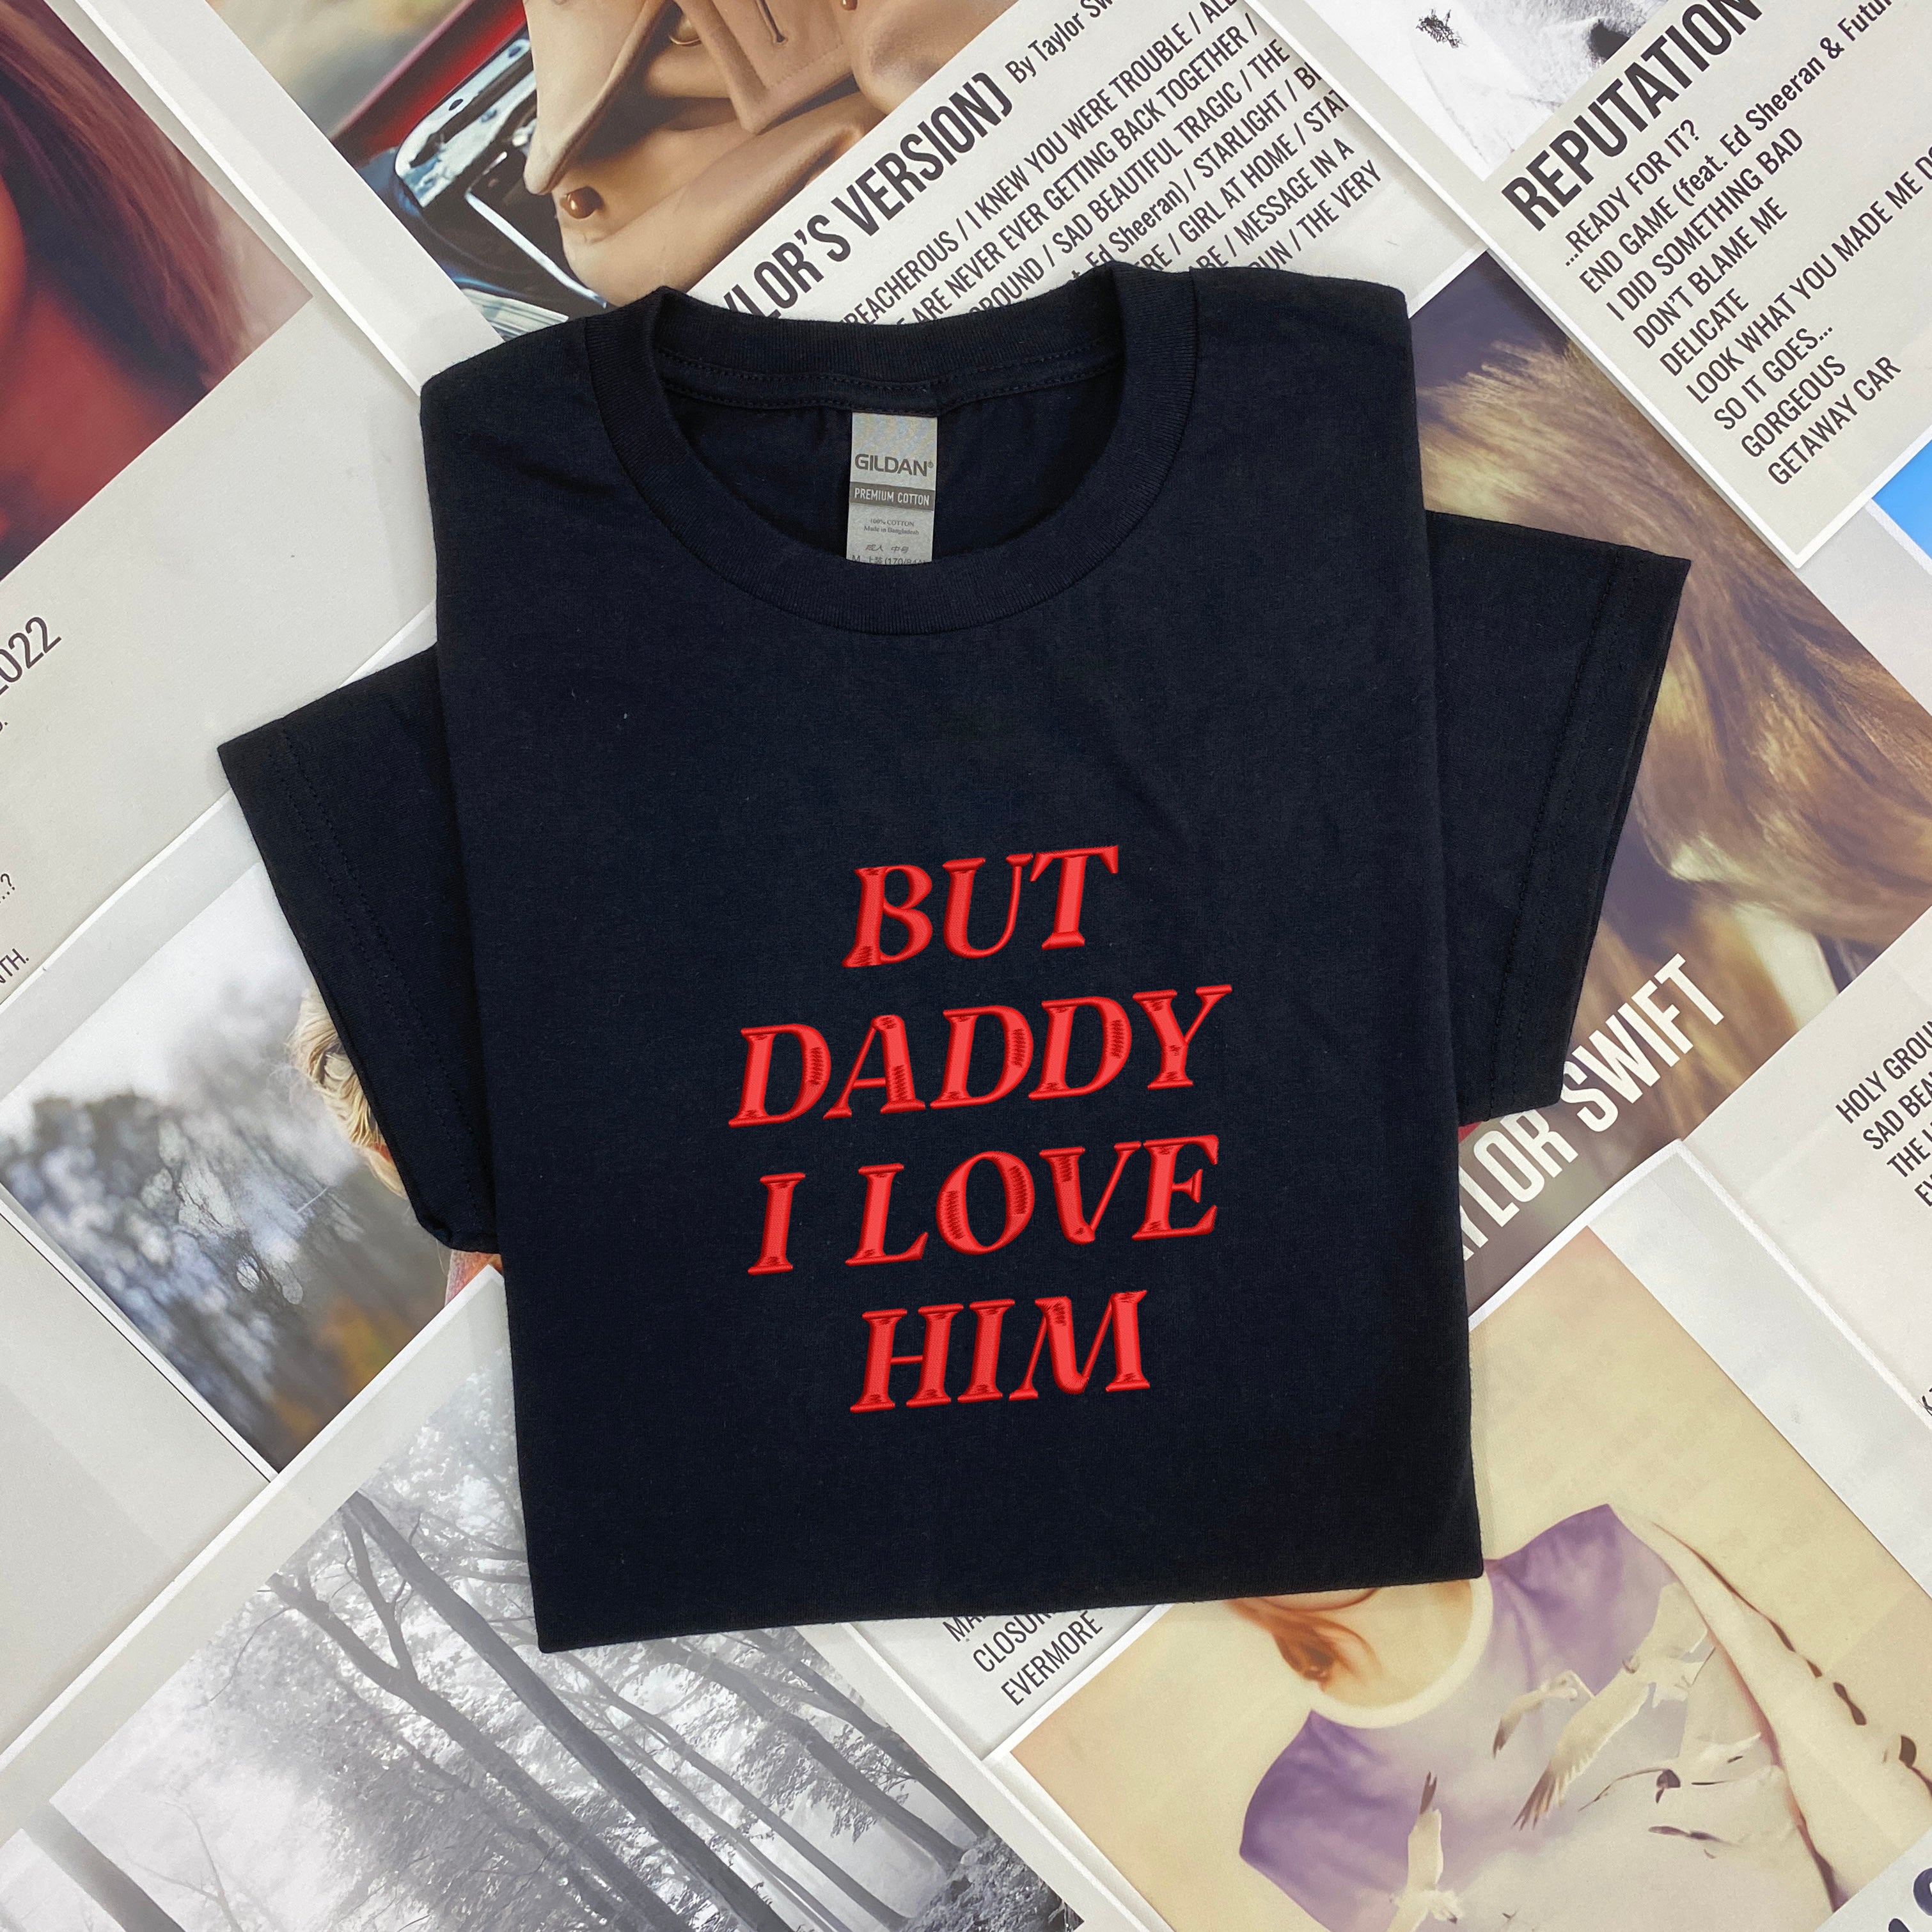 but daddy i love him embroidered shirt 1714190182548.jpg